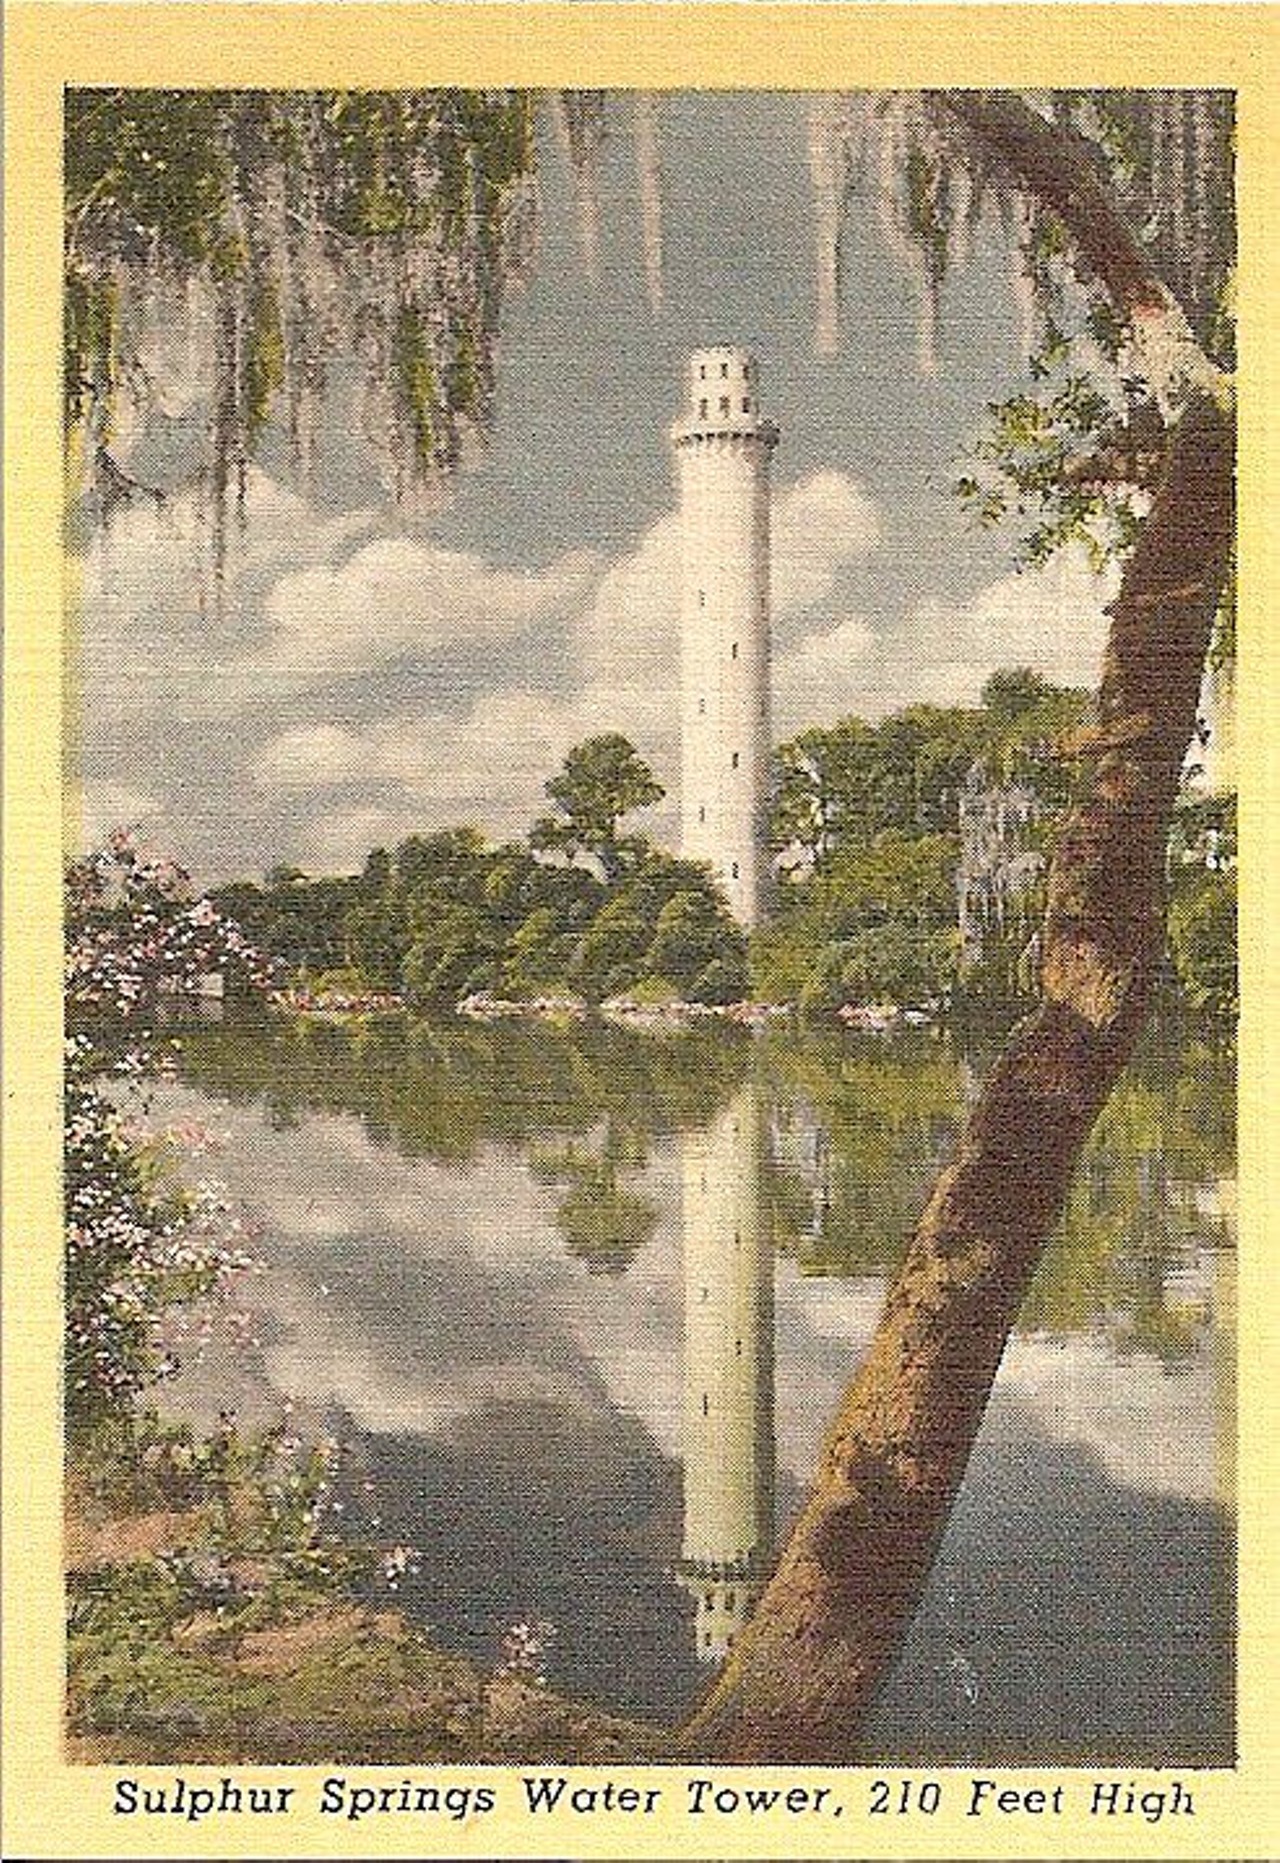 Sulphur Springs Water Tower
455-479 E Bird St, Tampa, FL
Built on top of an old water well in 1927, Sulphur Springs Water Tower was created to provide water pressure for the Sulphur Springs Hotel. Supposedly, the water tower was a popular place for suicidal jumpers during the Great Depression. 
Photo via Florida Memory